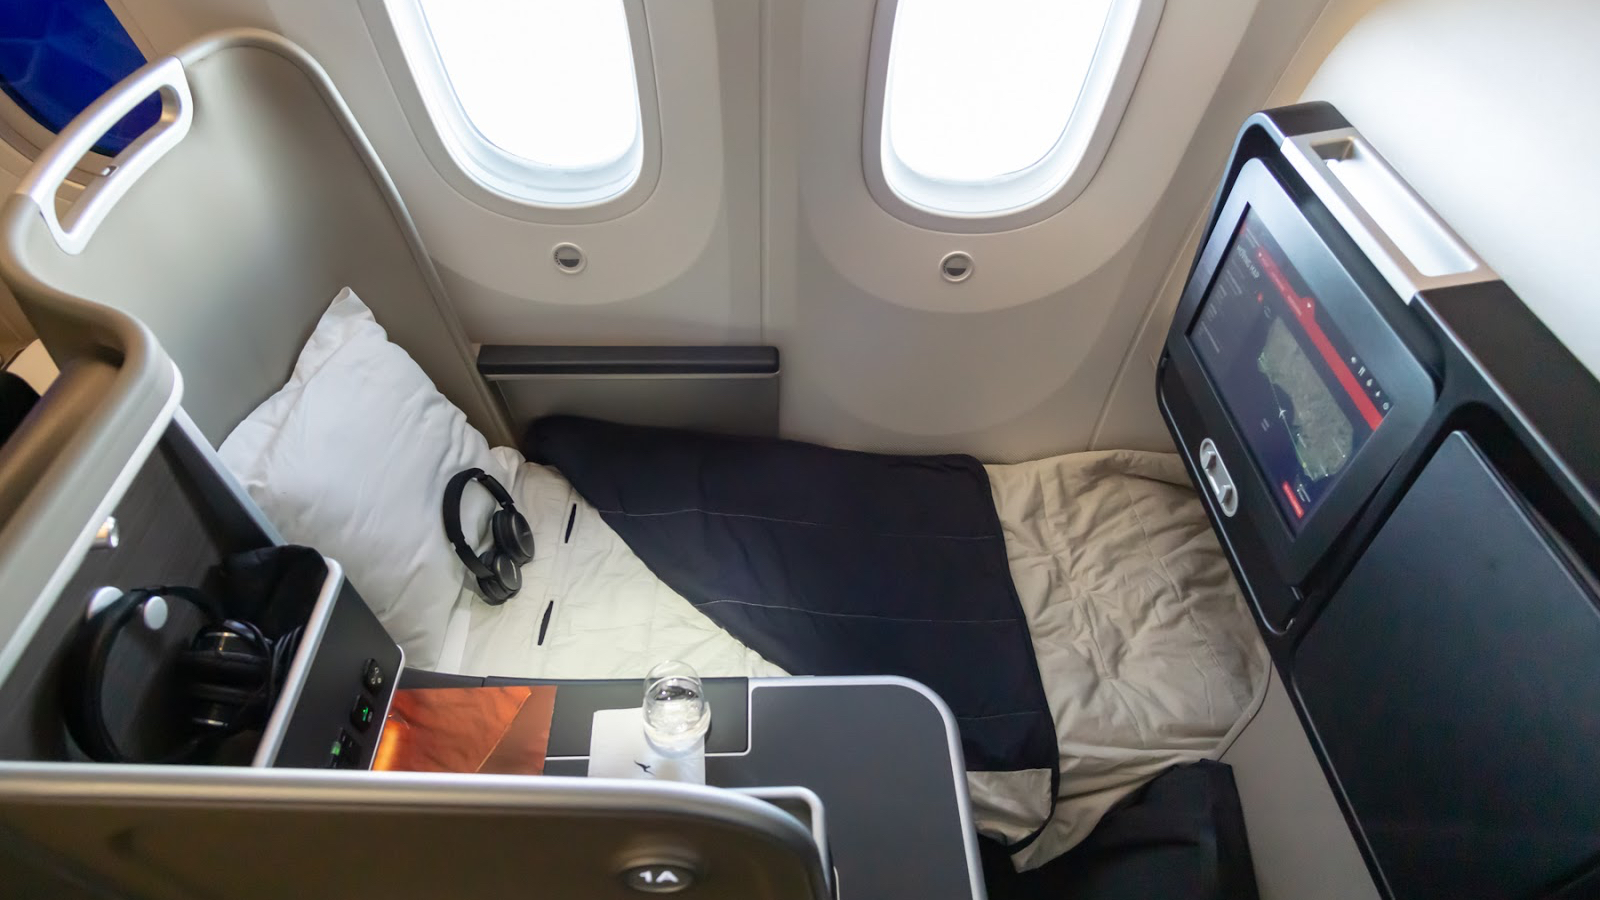 Qantas Boeing 787 Business Class overview - Point Hacks